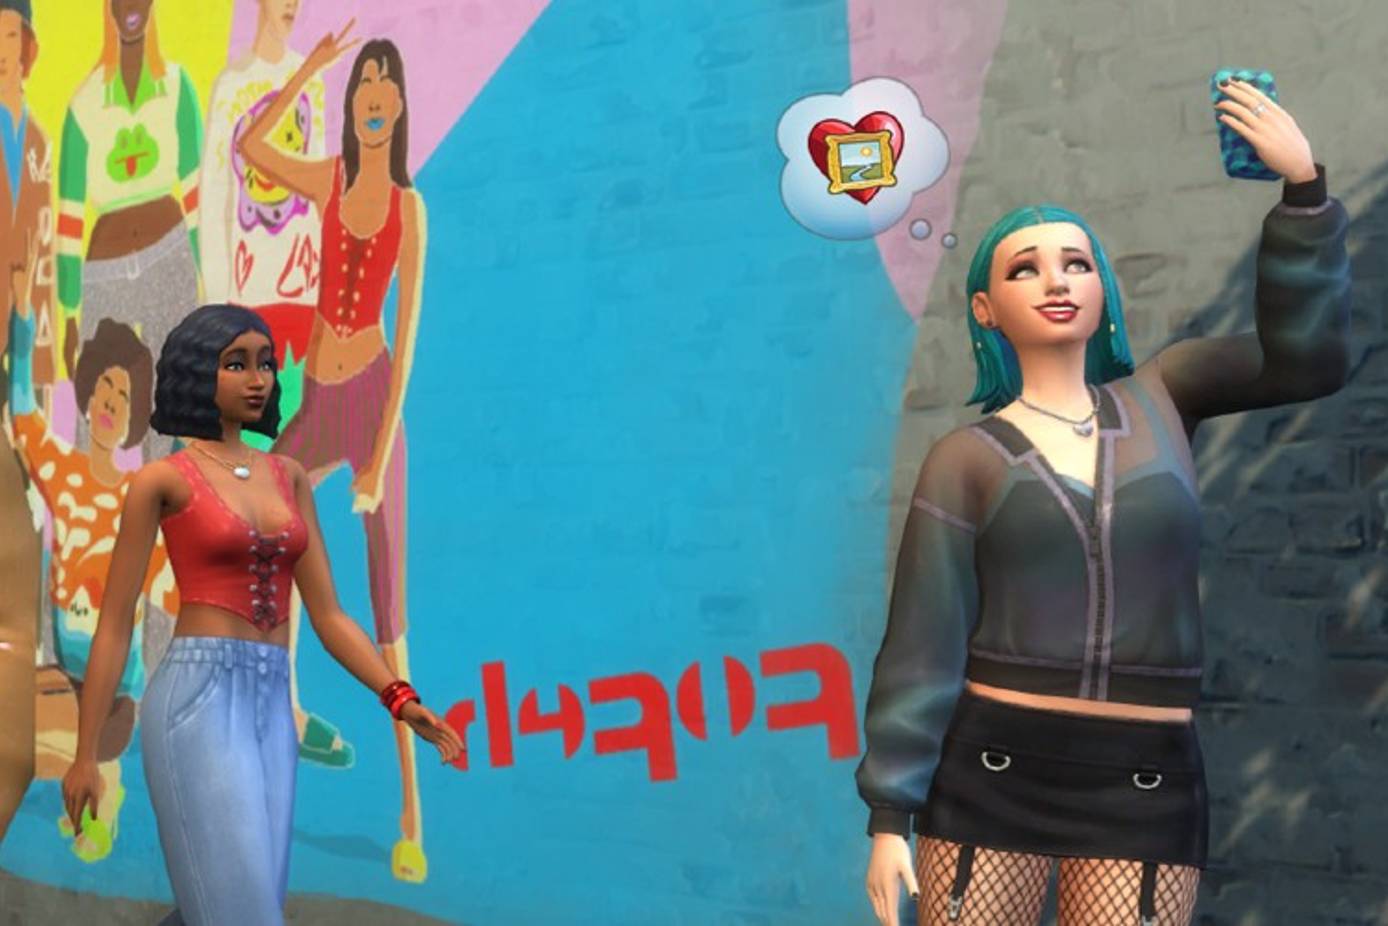 Depop is bringing virtual thrifting to gaming with The Sims